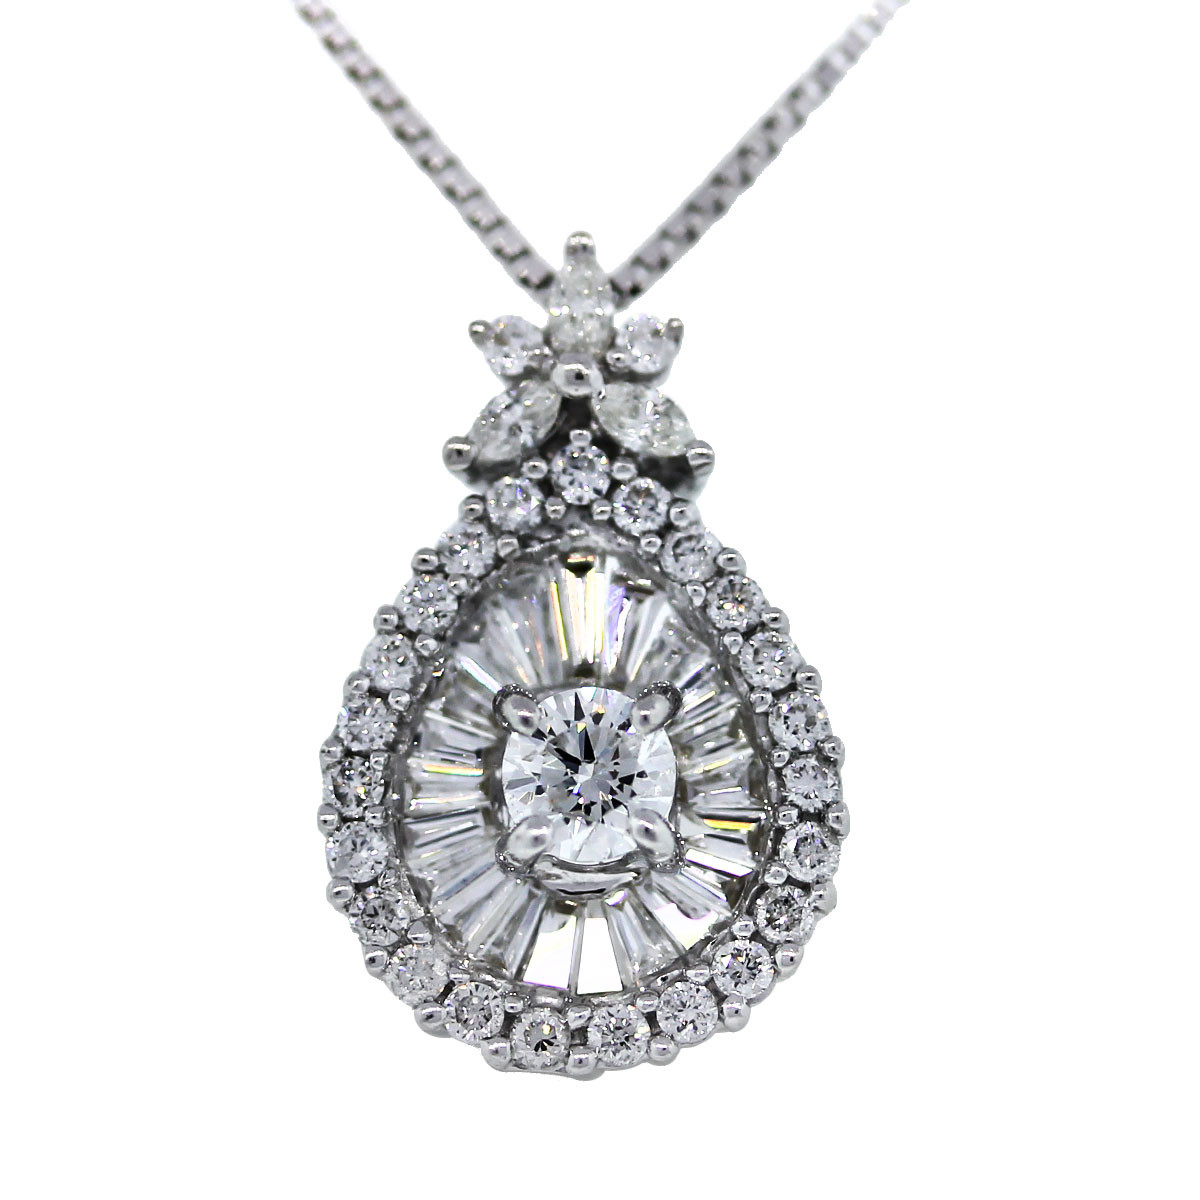 White Gold Necklace With Pendant
 14k White Gold Teardrop Diamond Necklace